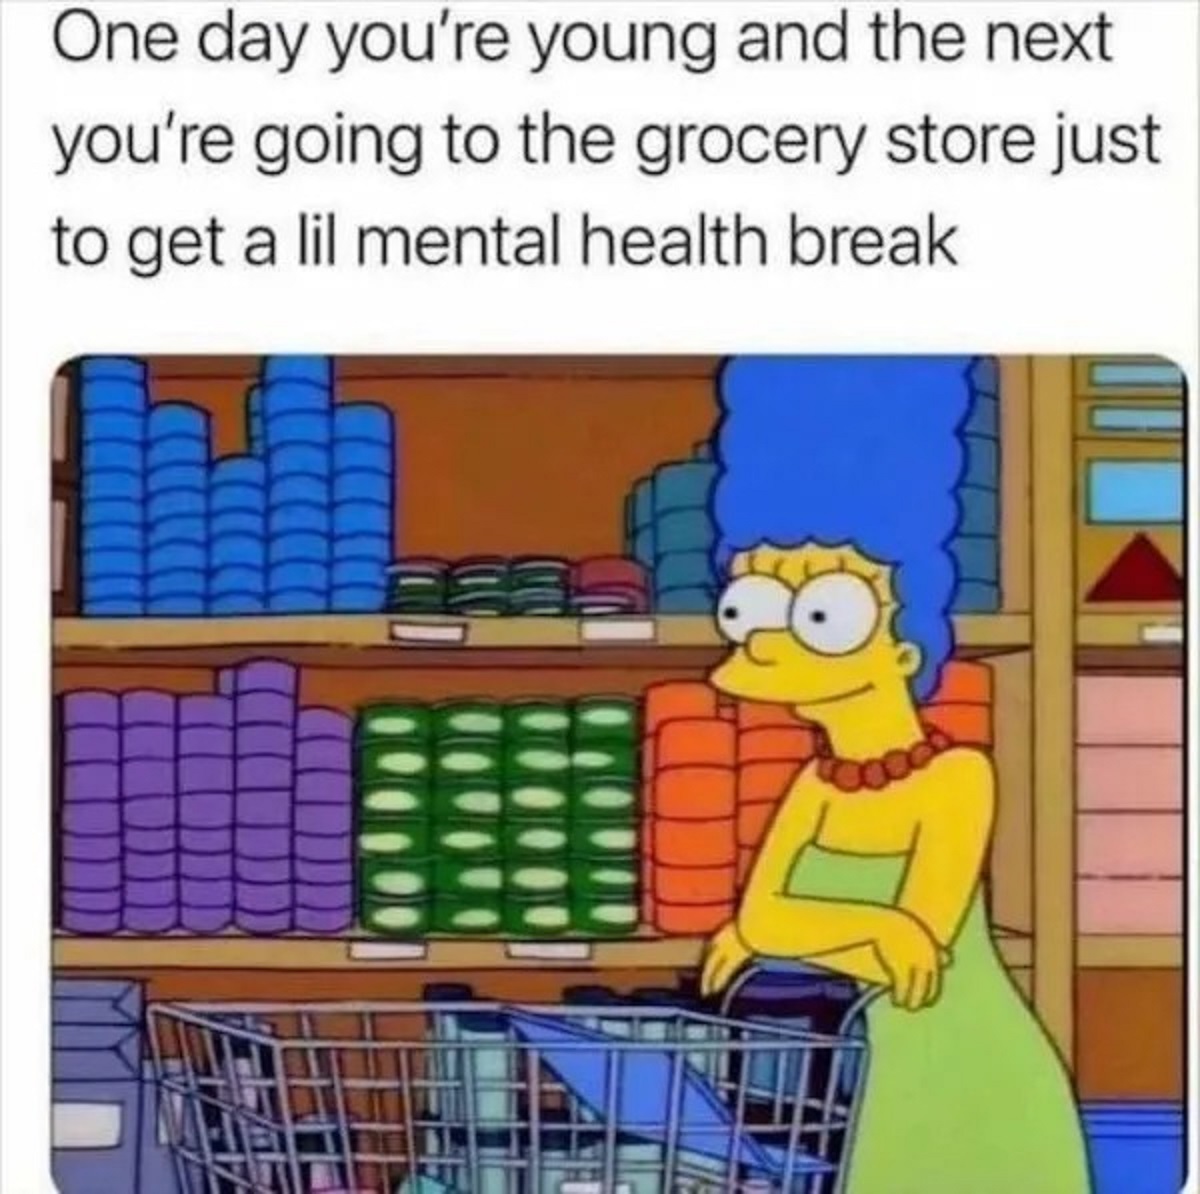 cartoon - One day you're young and the next you're going to the grocery store just to get a lil mental health break